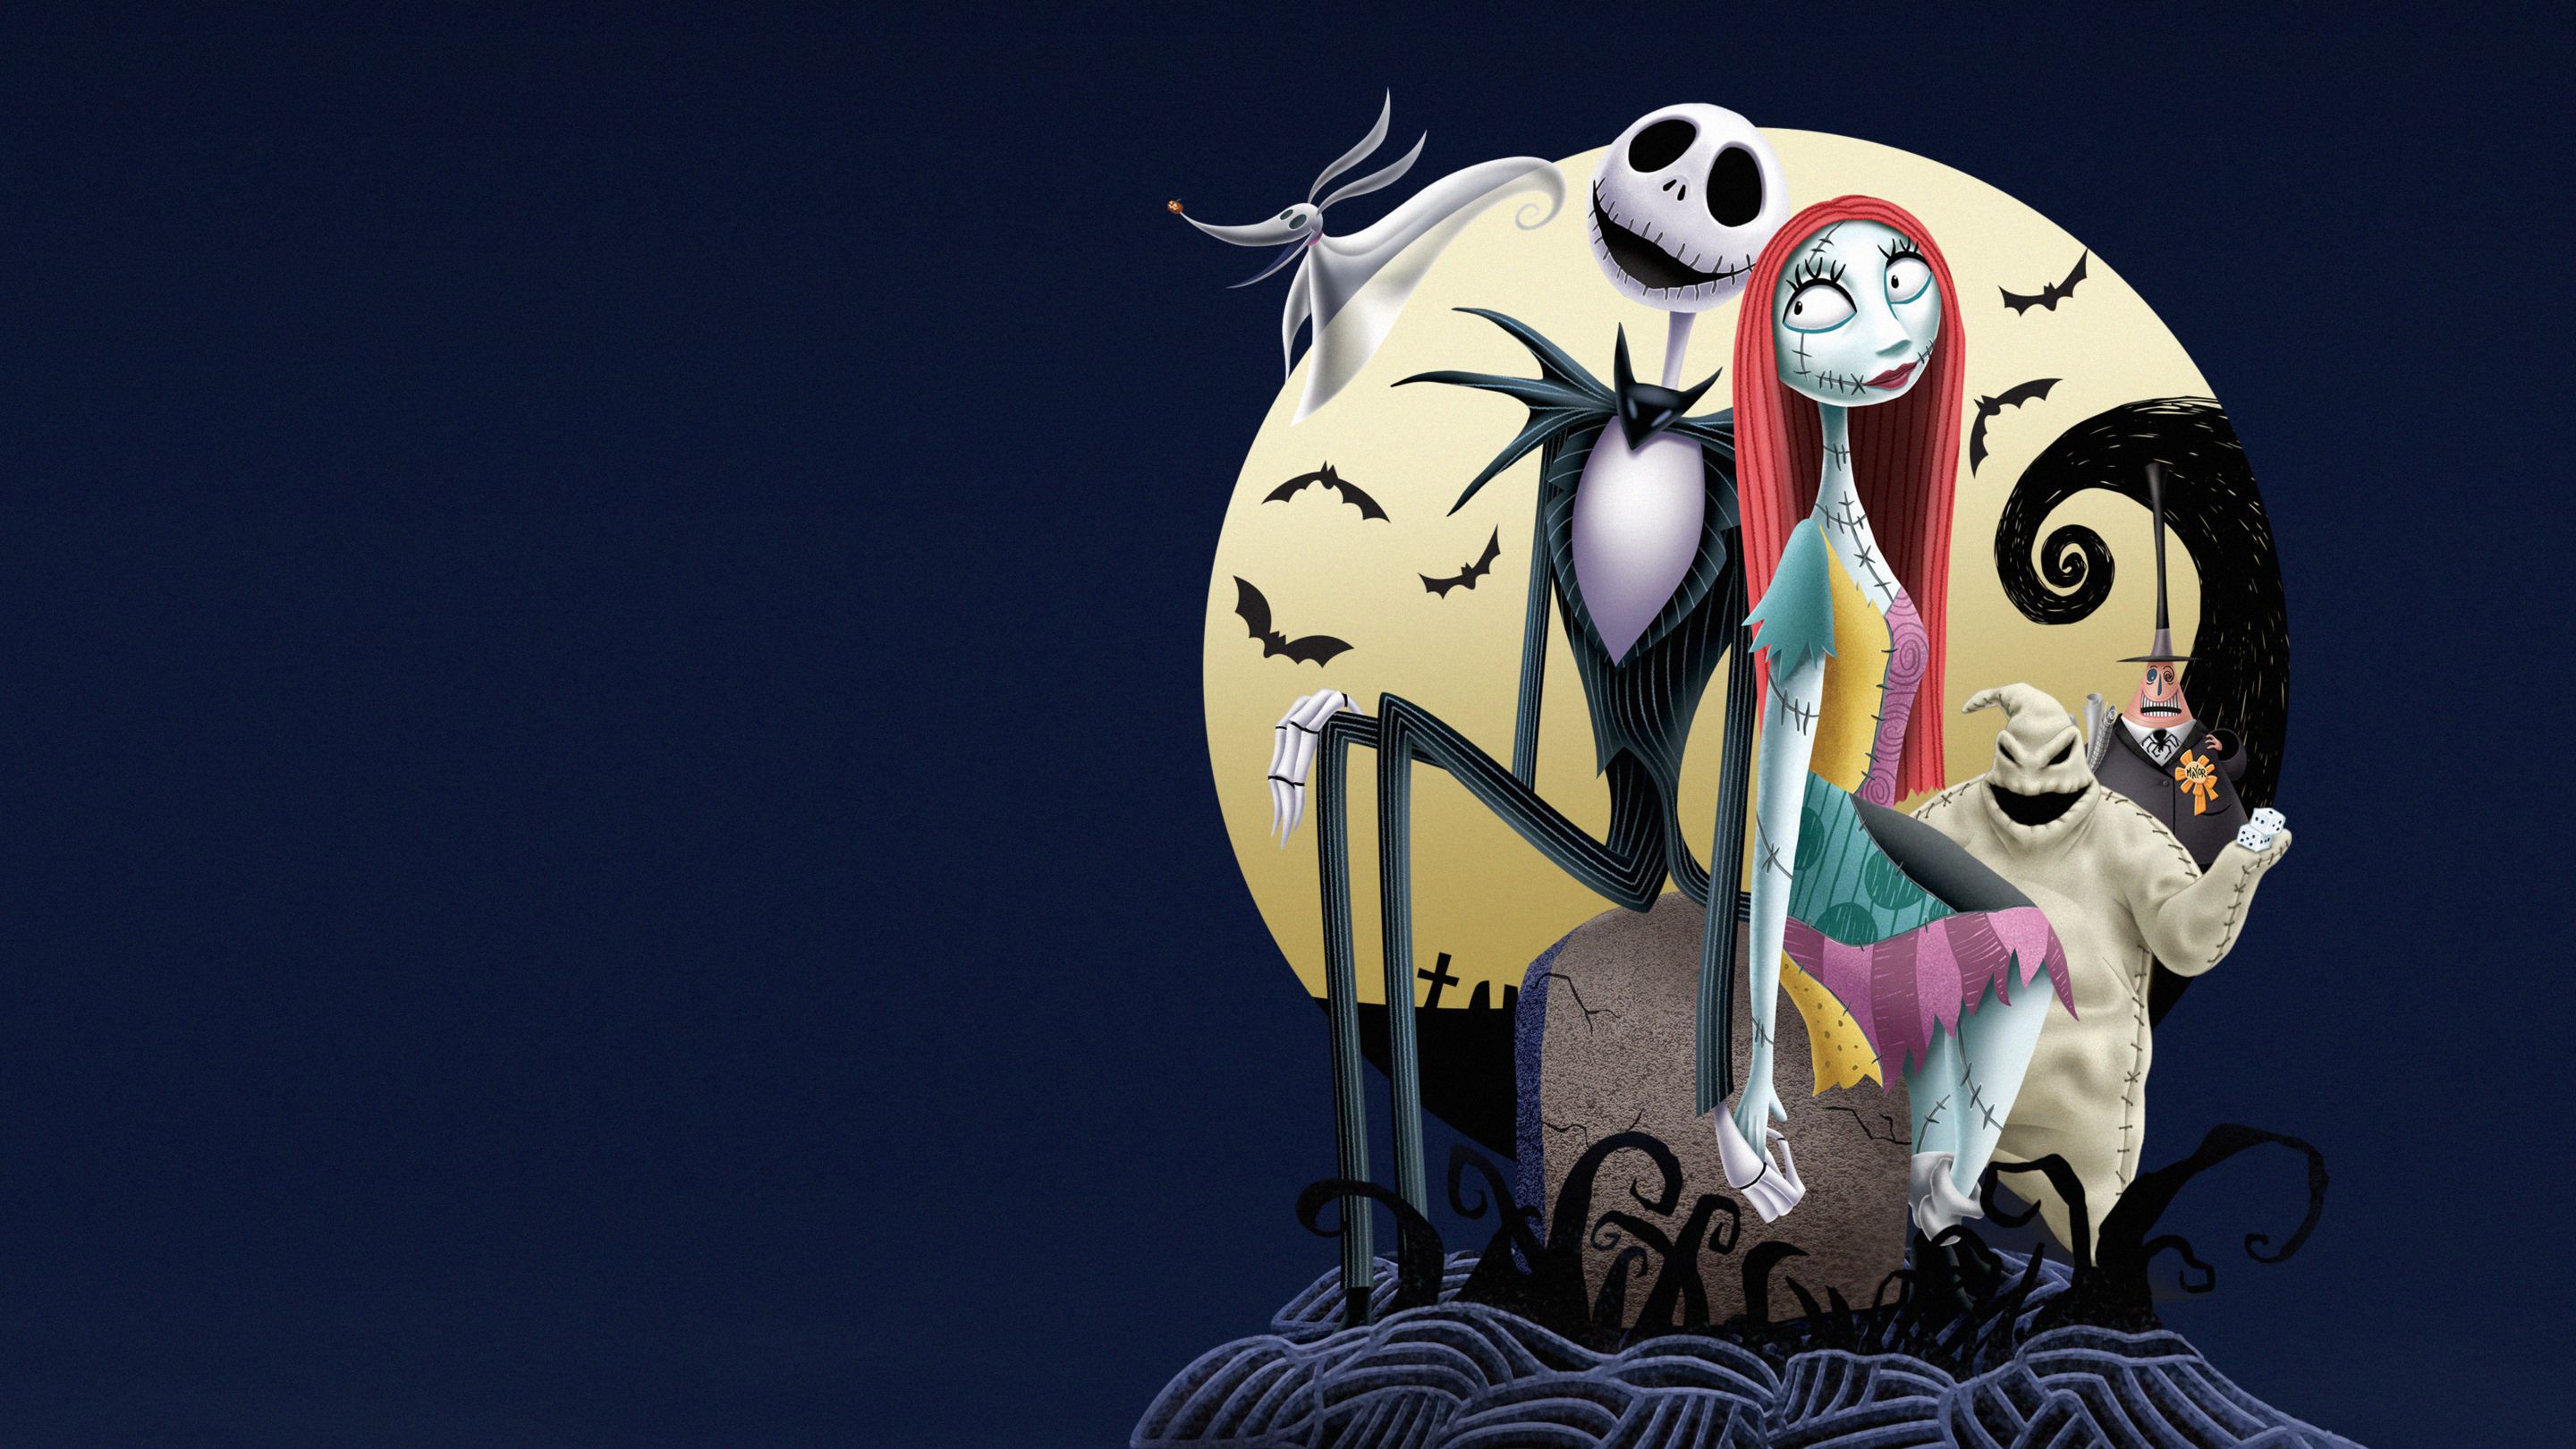 The Nightmare Before Christmas Wallpapers / We have 60